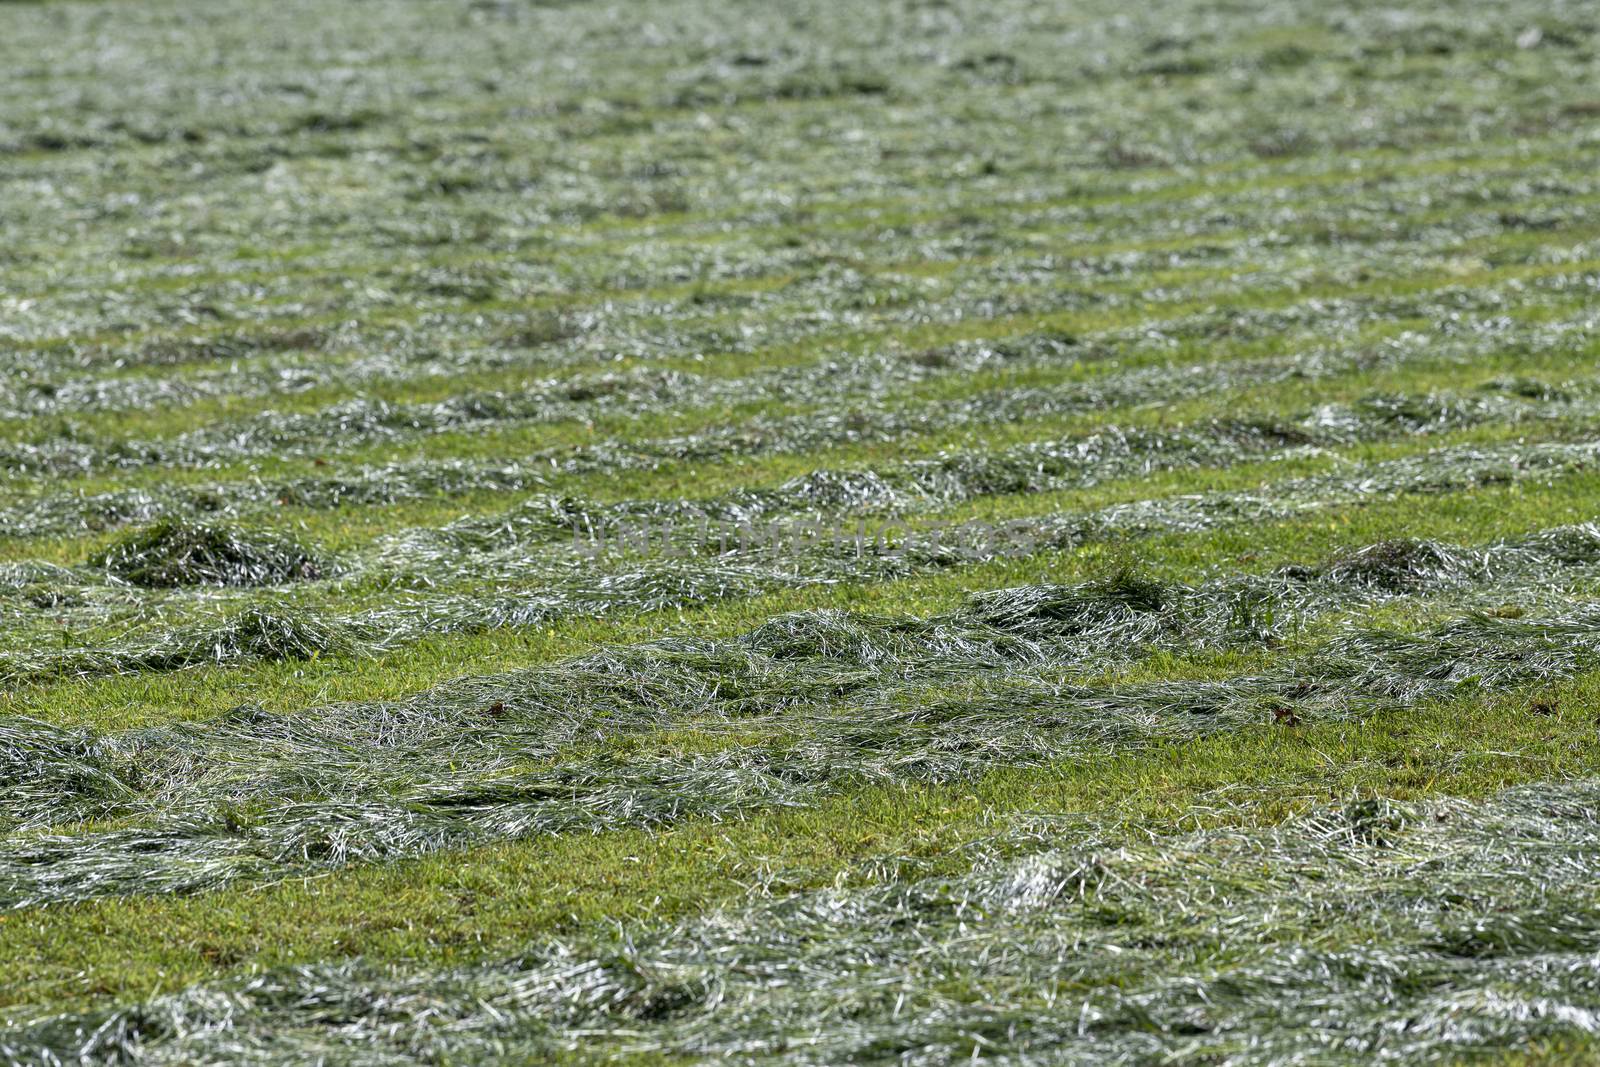 Freshly cut grass on a pasture in the Netherlands intended as silage for the winter months